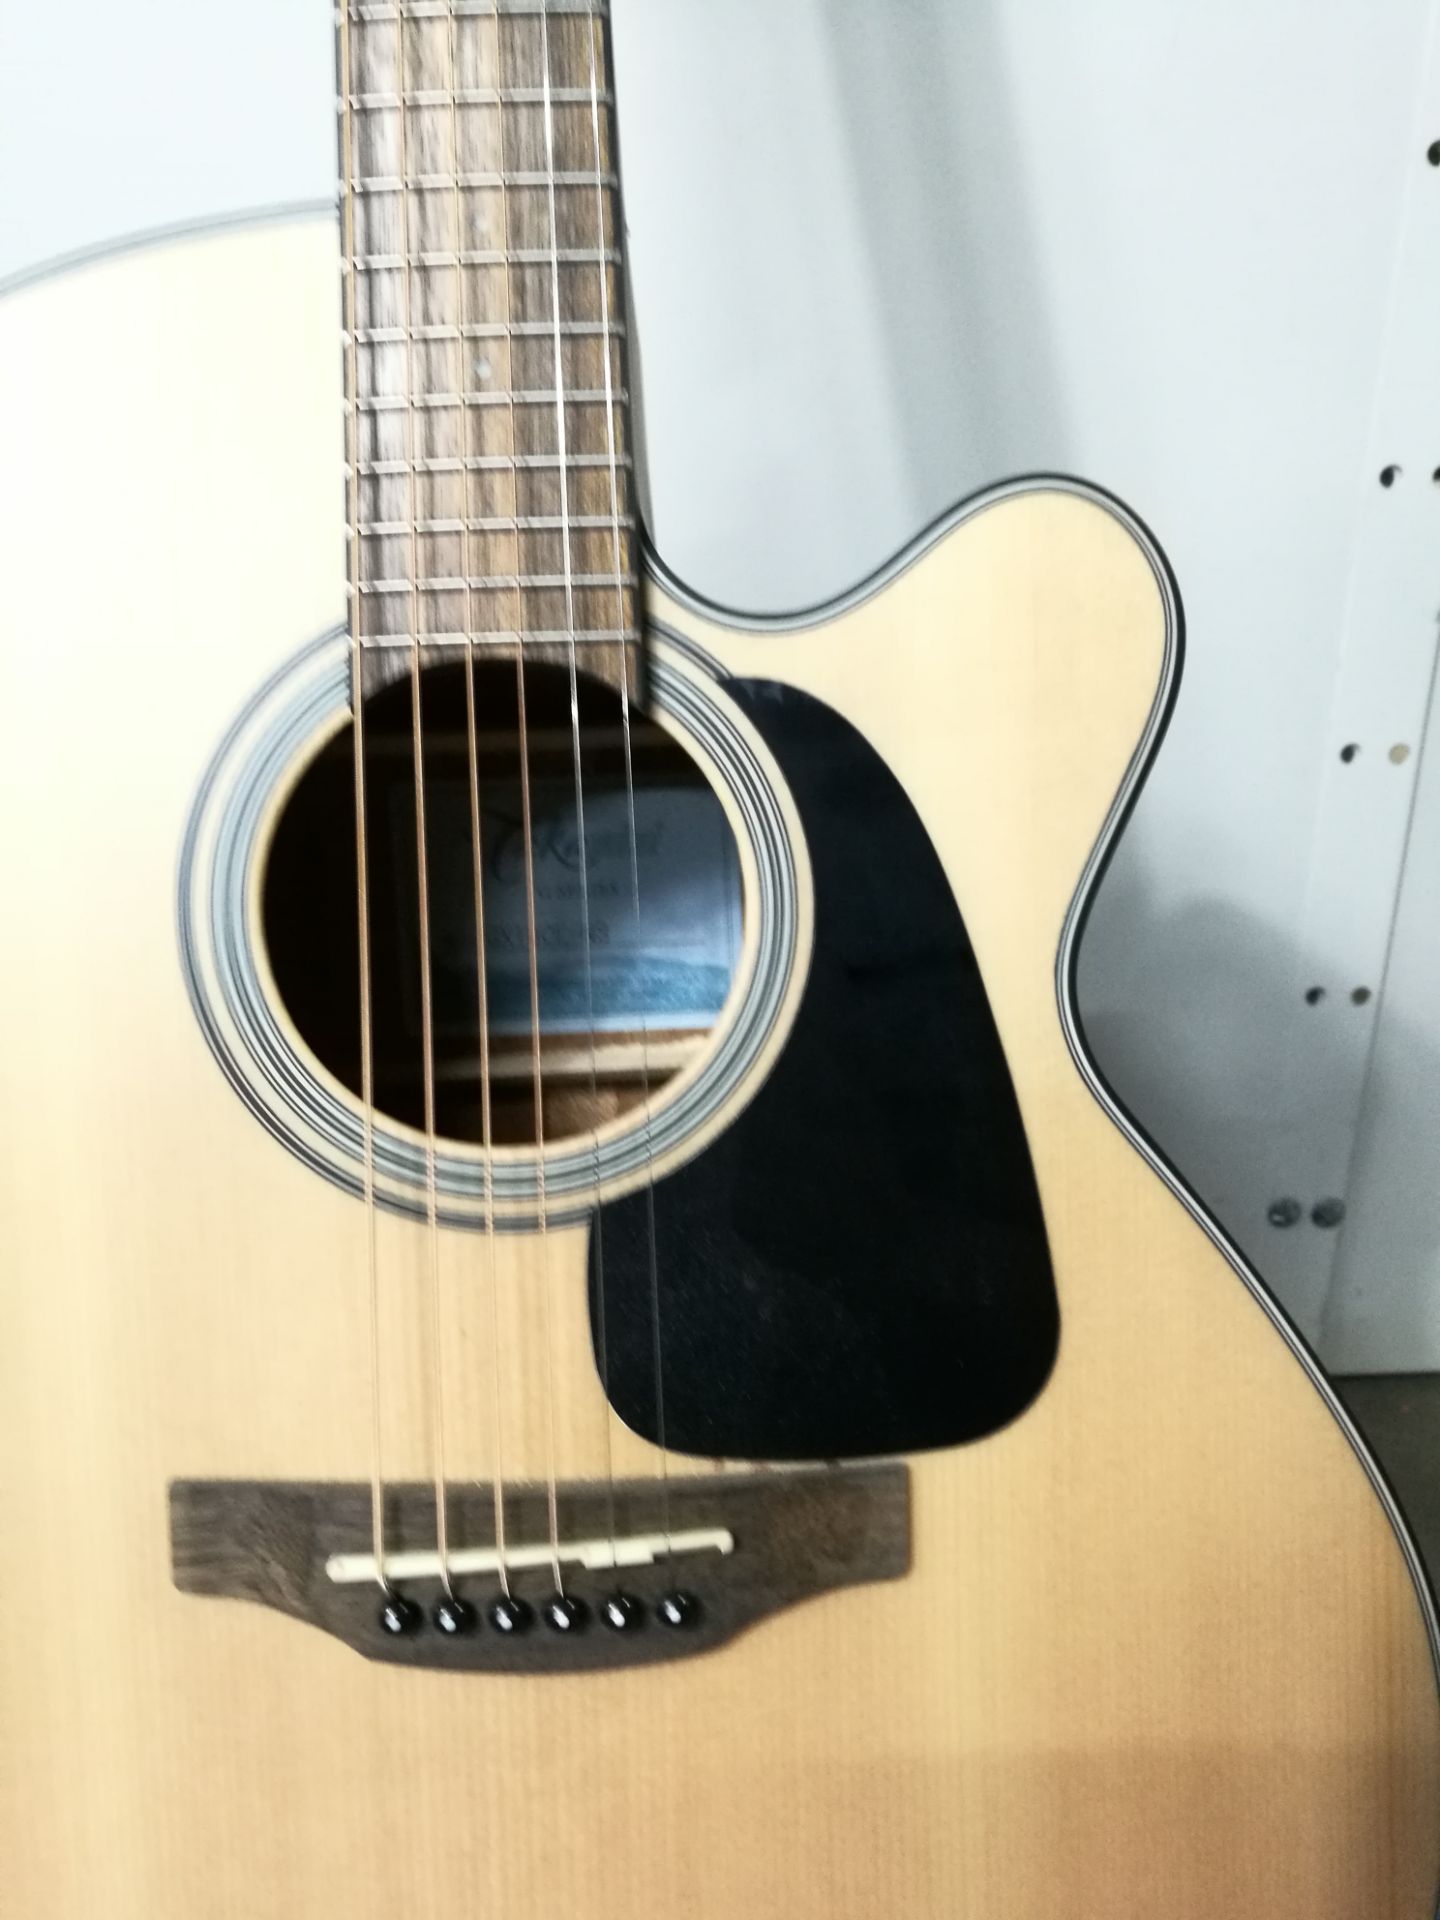 Takamine GX18CE 3/4 Size Taka-Mini Electro Acoustic Guitar in Natural Finish with Gig Bag - Image 5 of 9